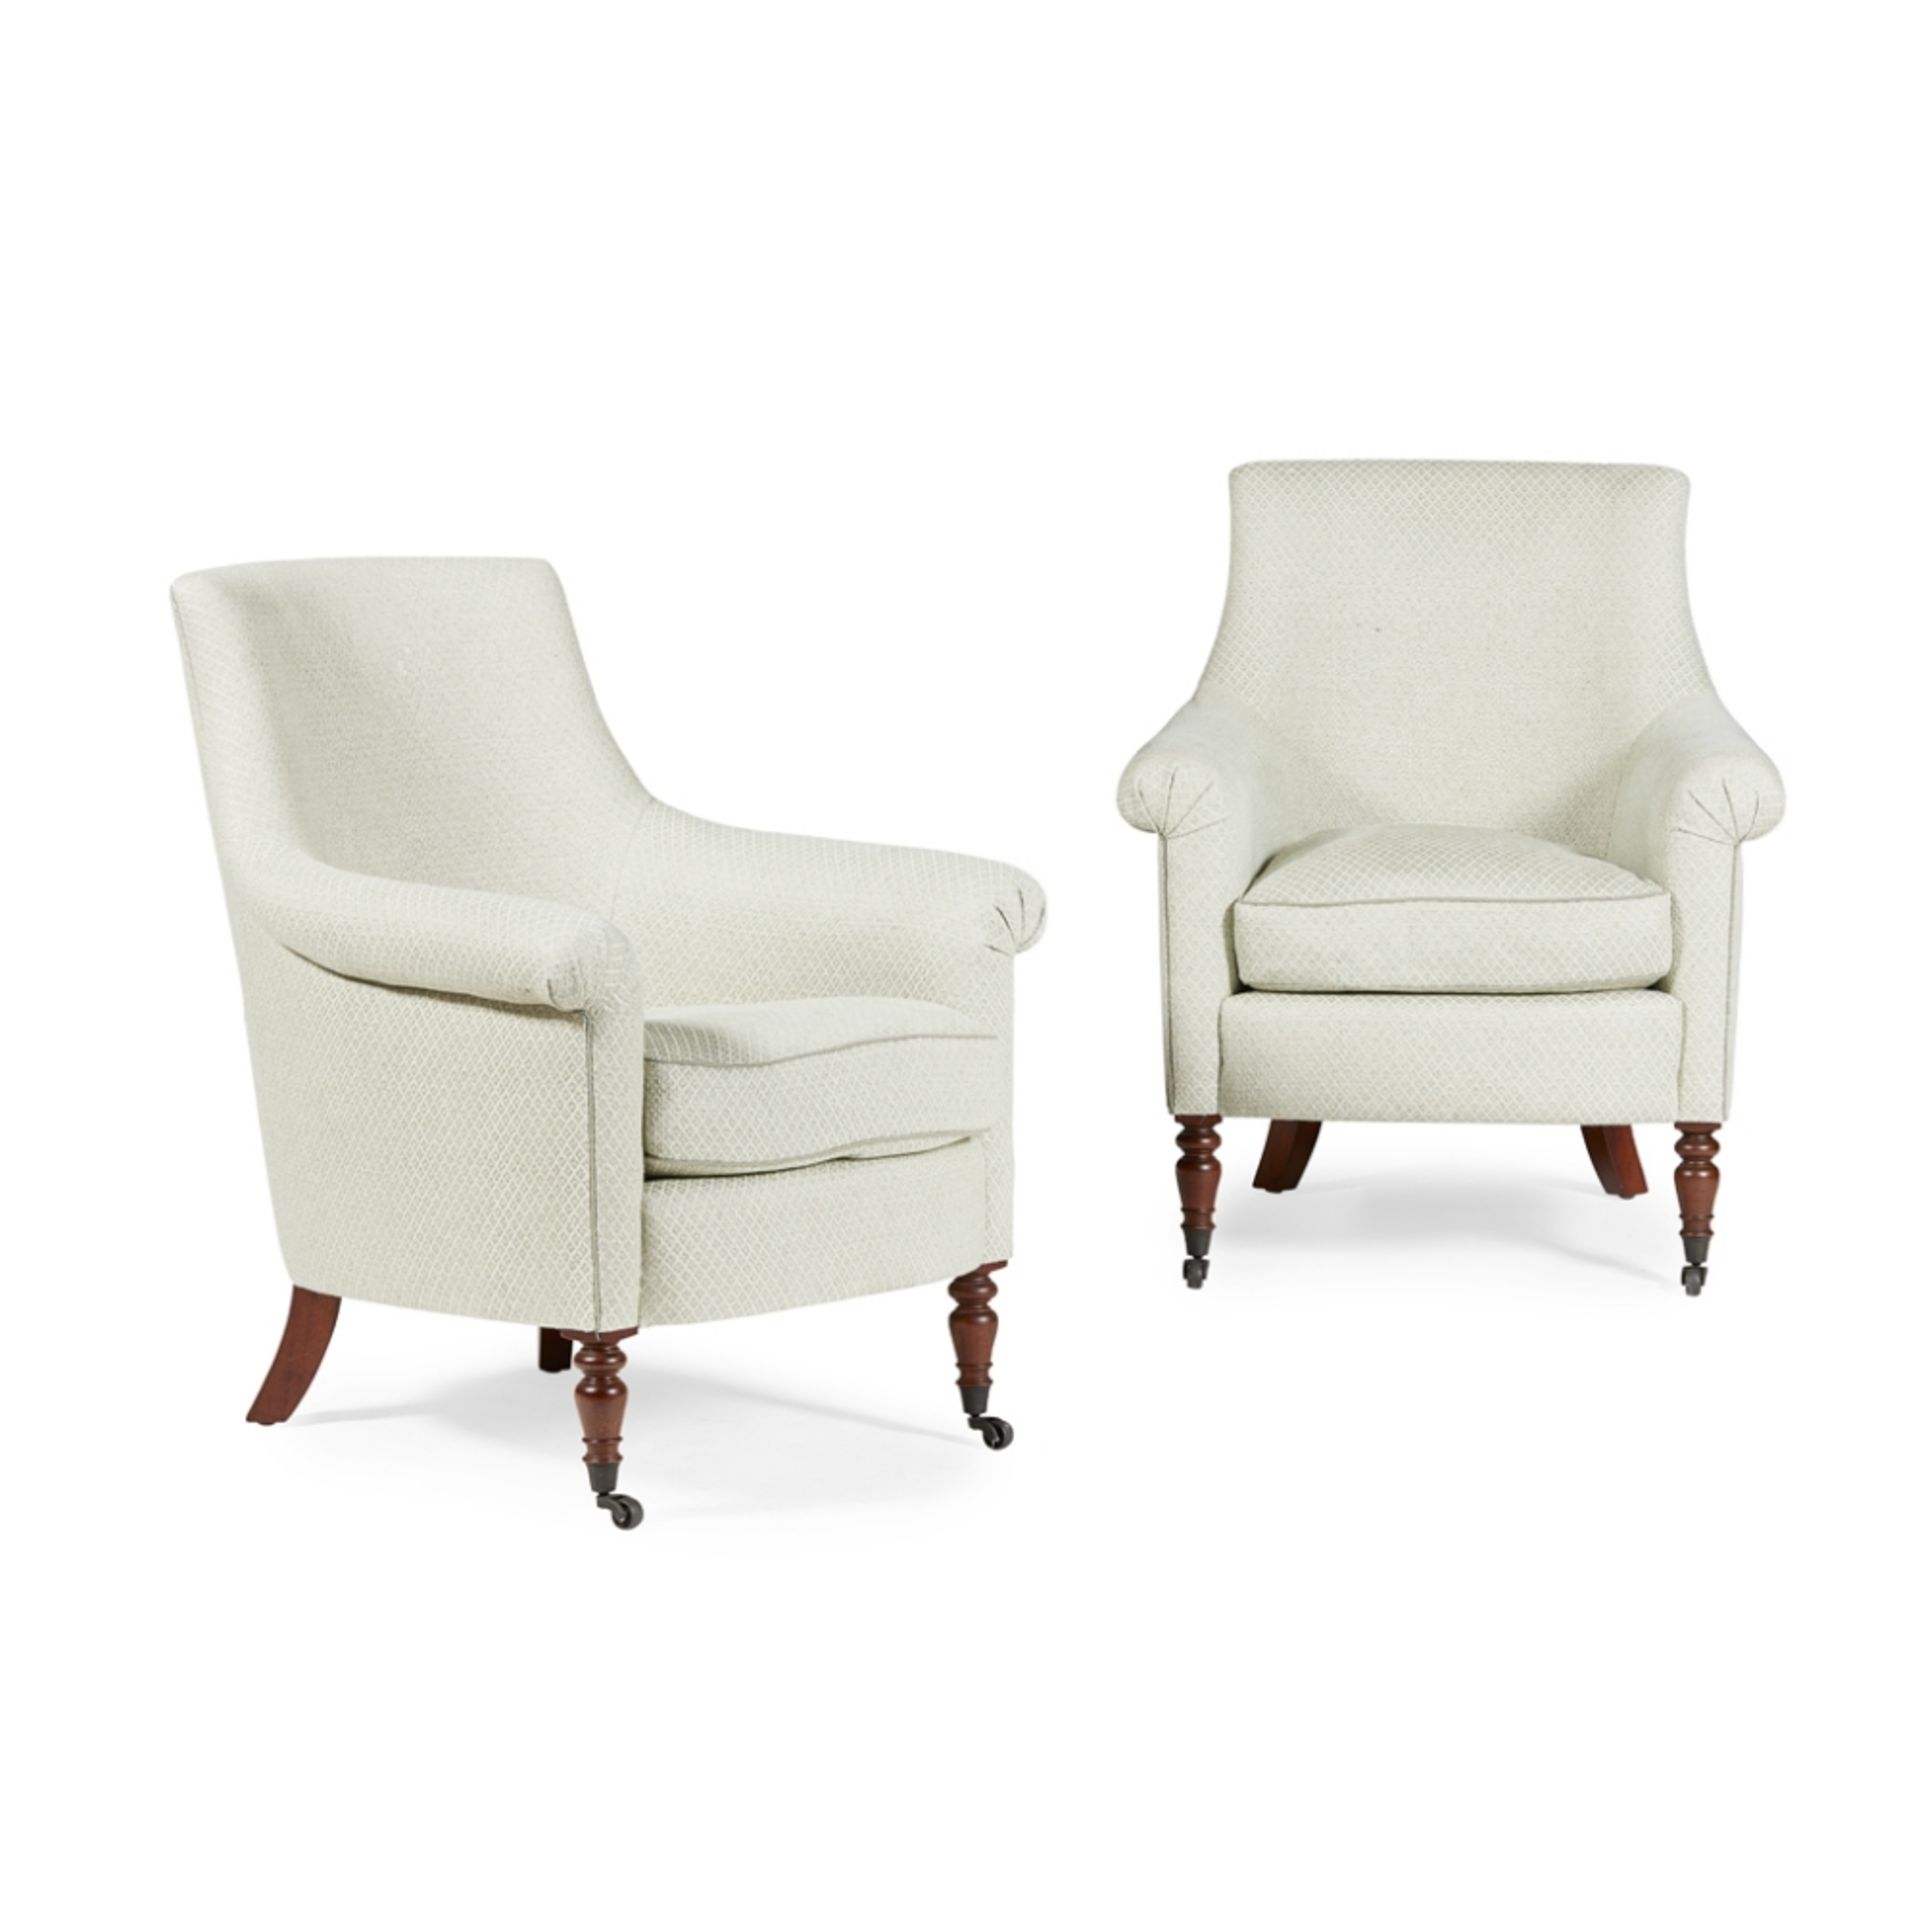 PAIR OF 'POLLYANNA' TUB ARMCHAIRS BY KINGCOMEMODERN the curved backs and scrolled arms over down and